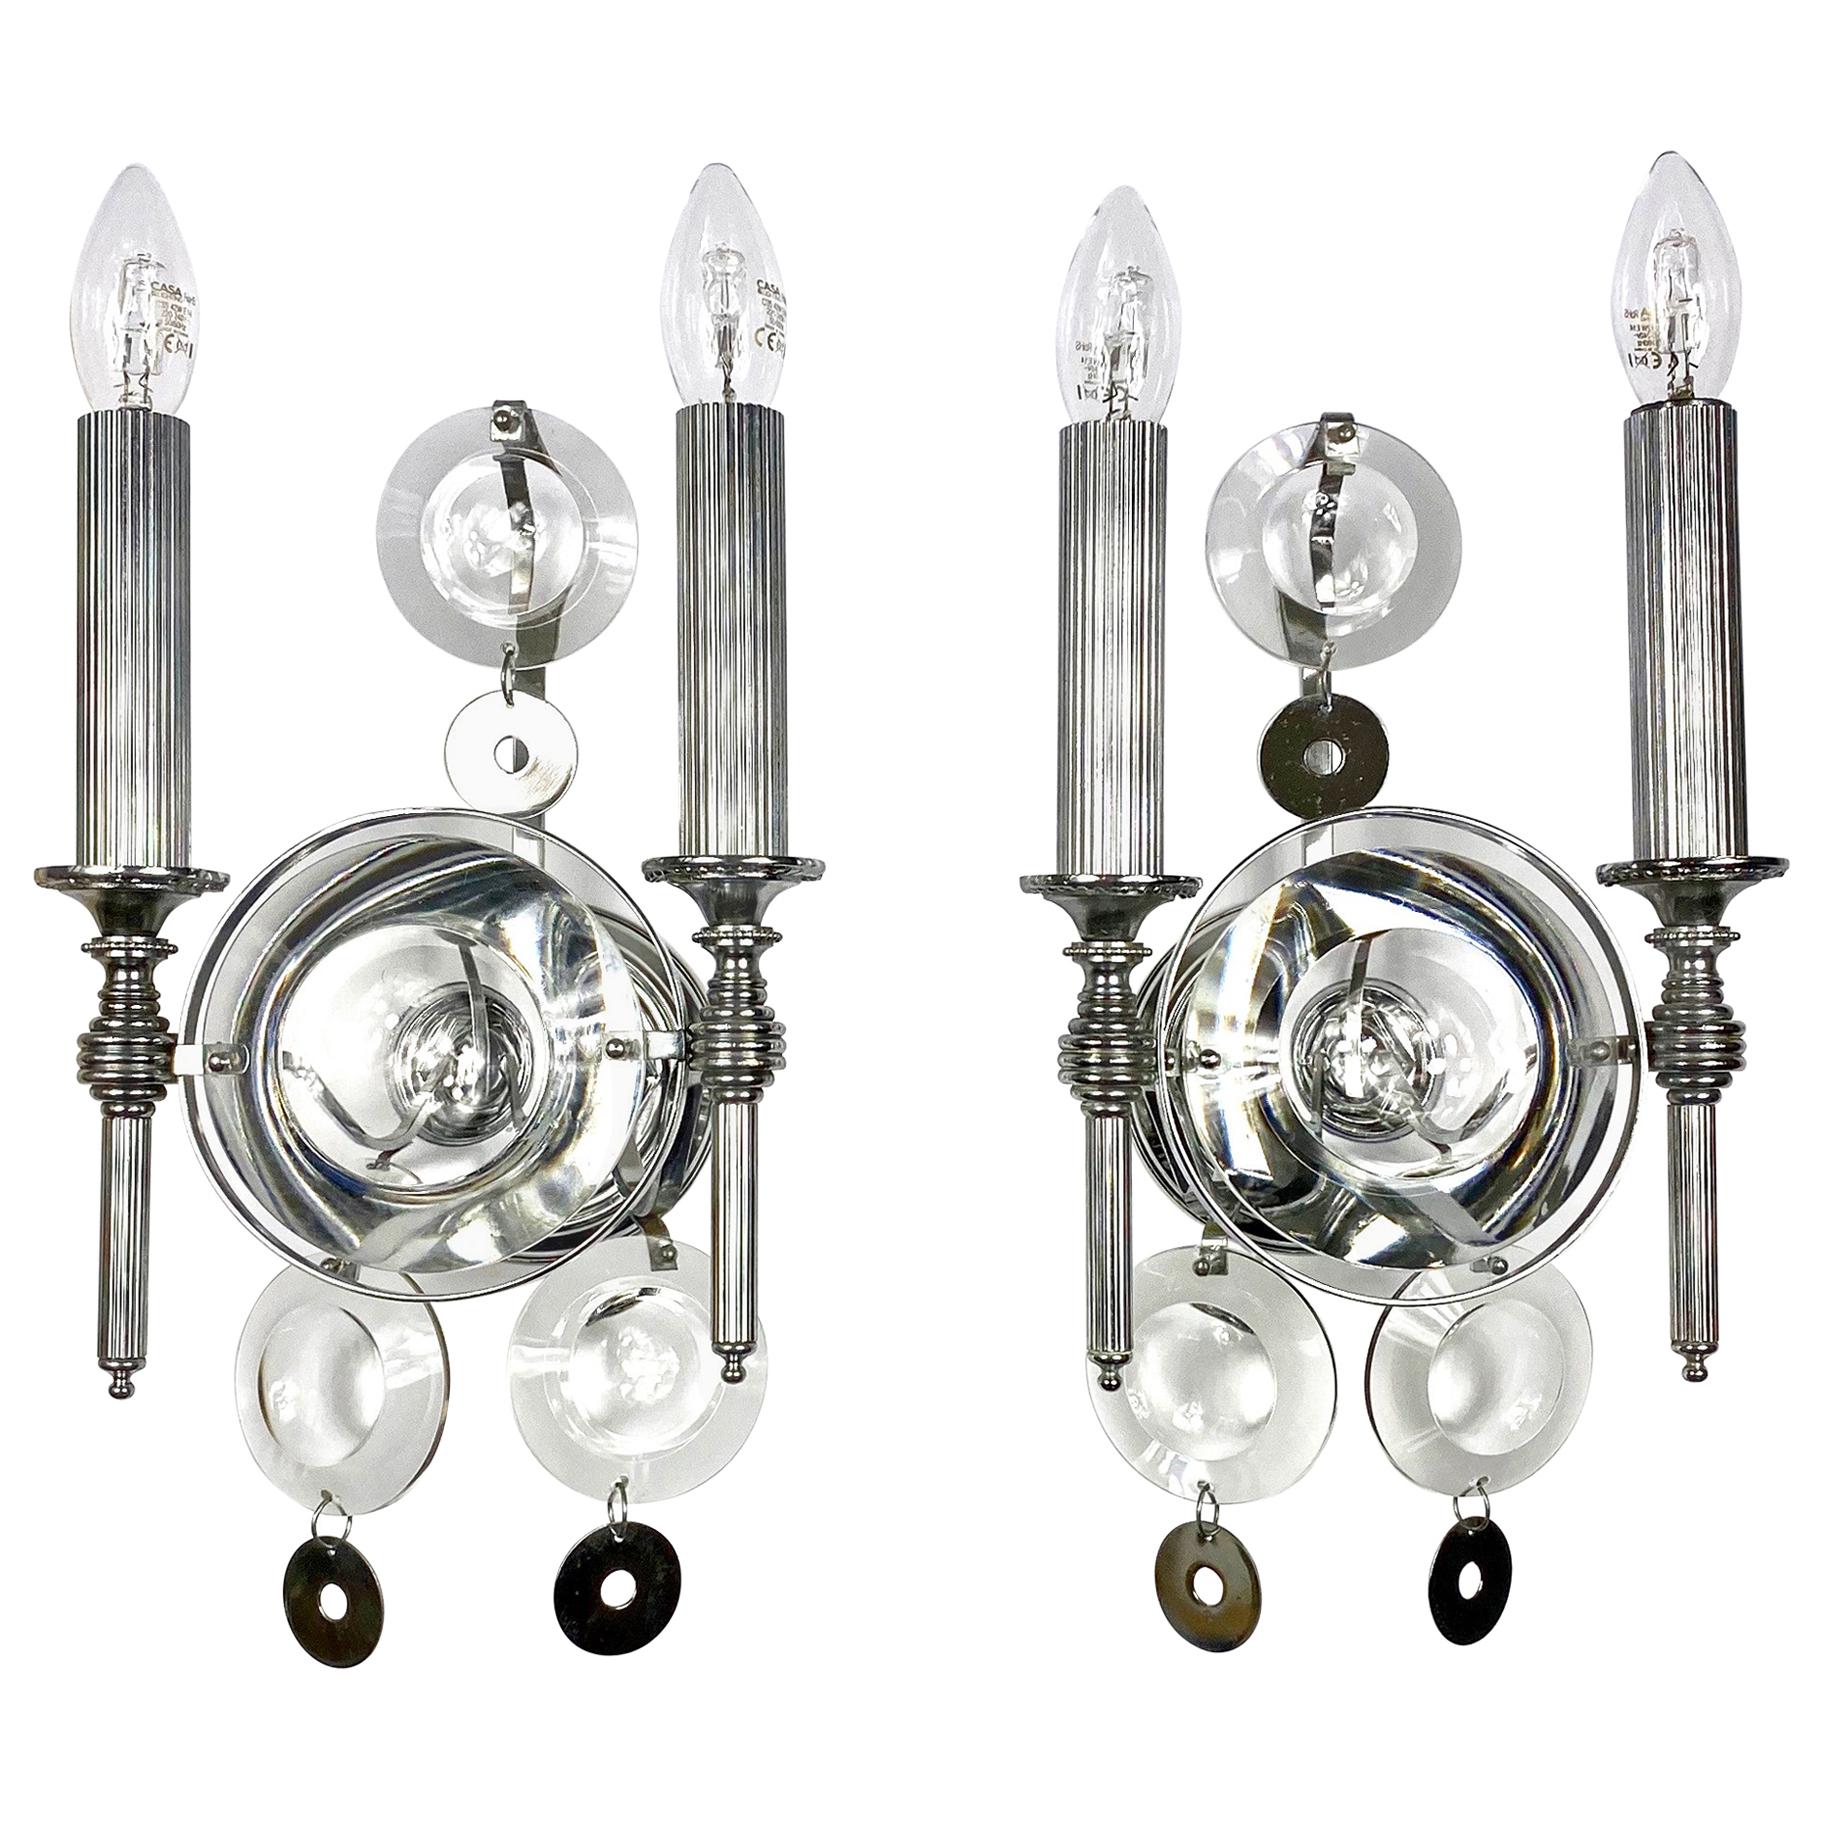 Pair of Sciolari Sconces Wall Lamp, Metal and Glass, Italy, 1970s For Sale